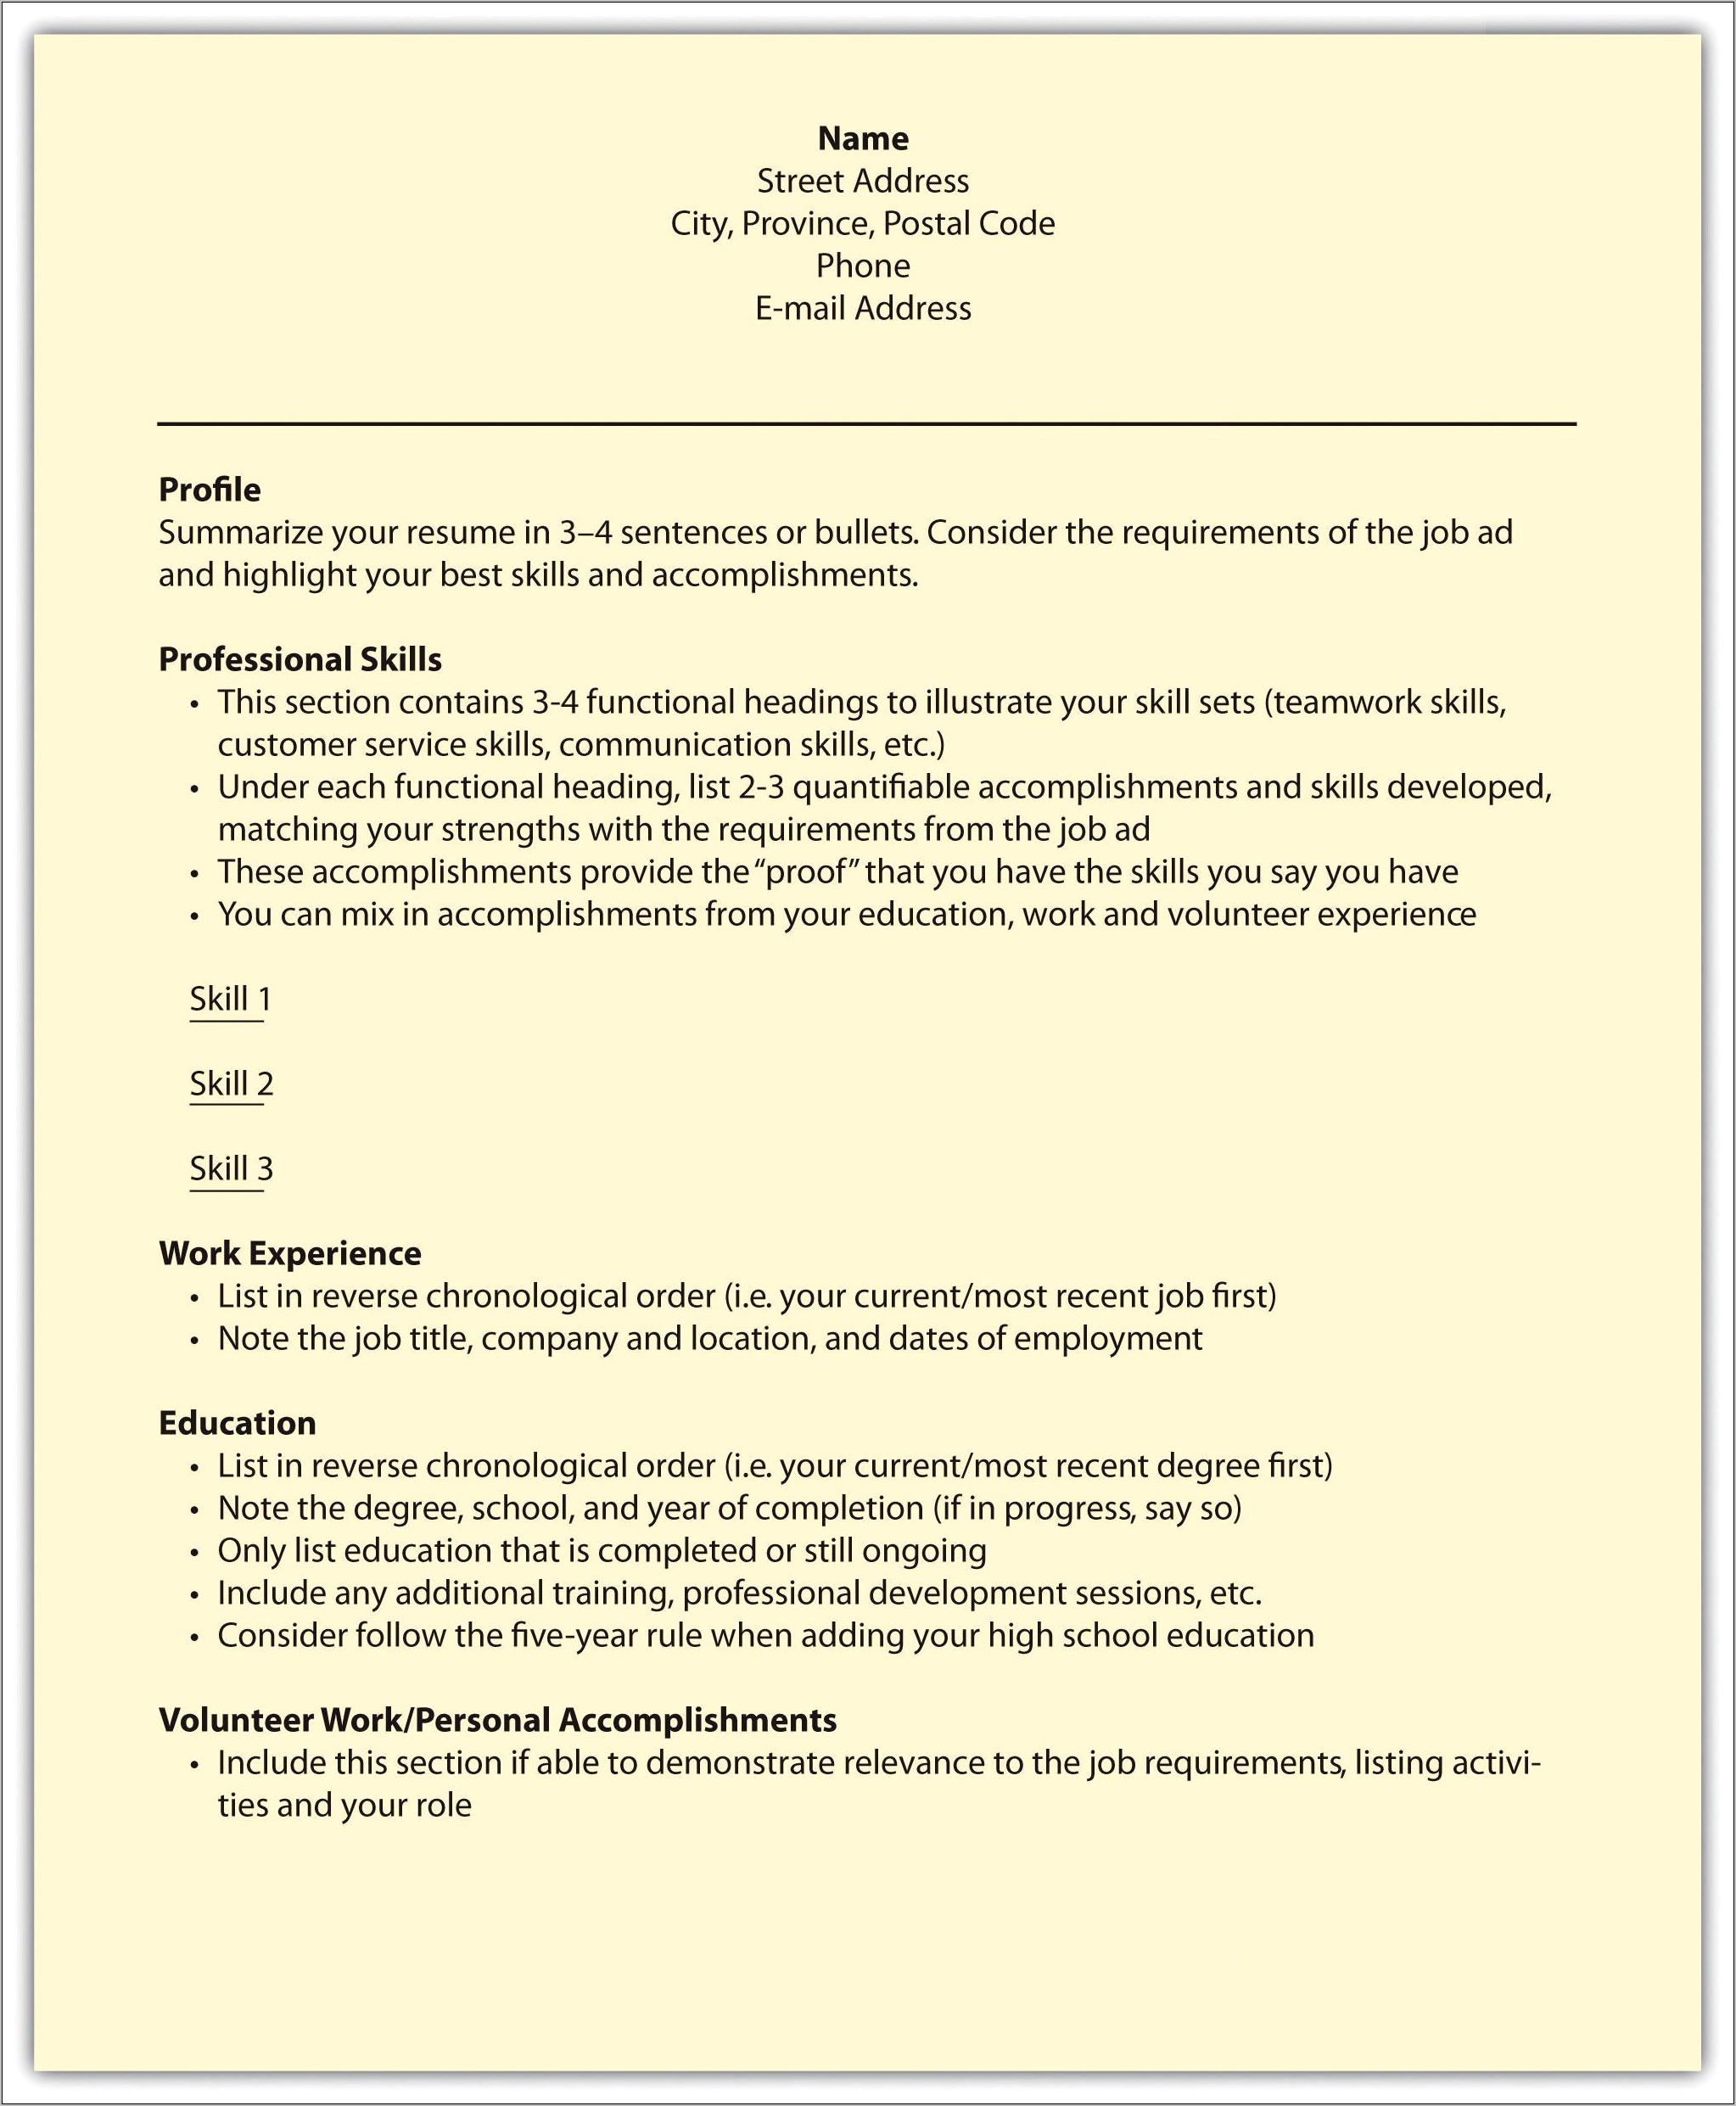 Listing Acheivements Under Work Experience Resume